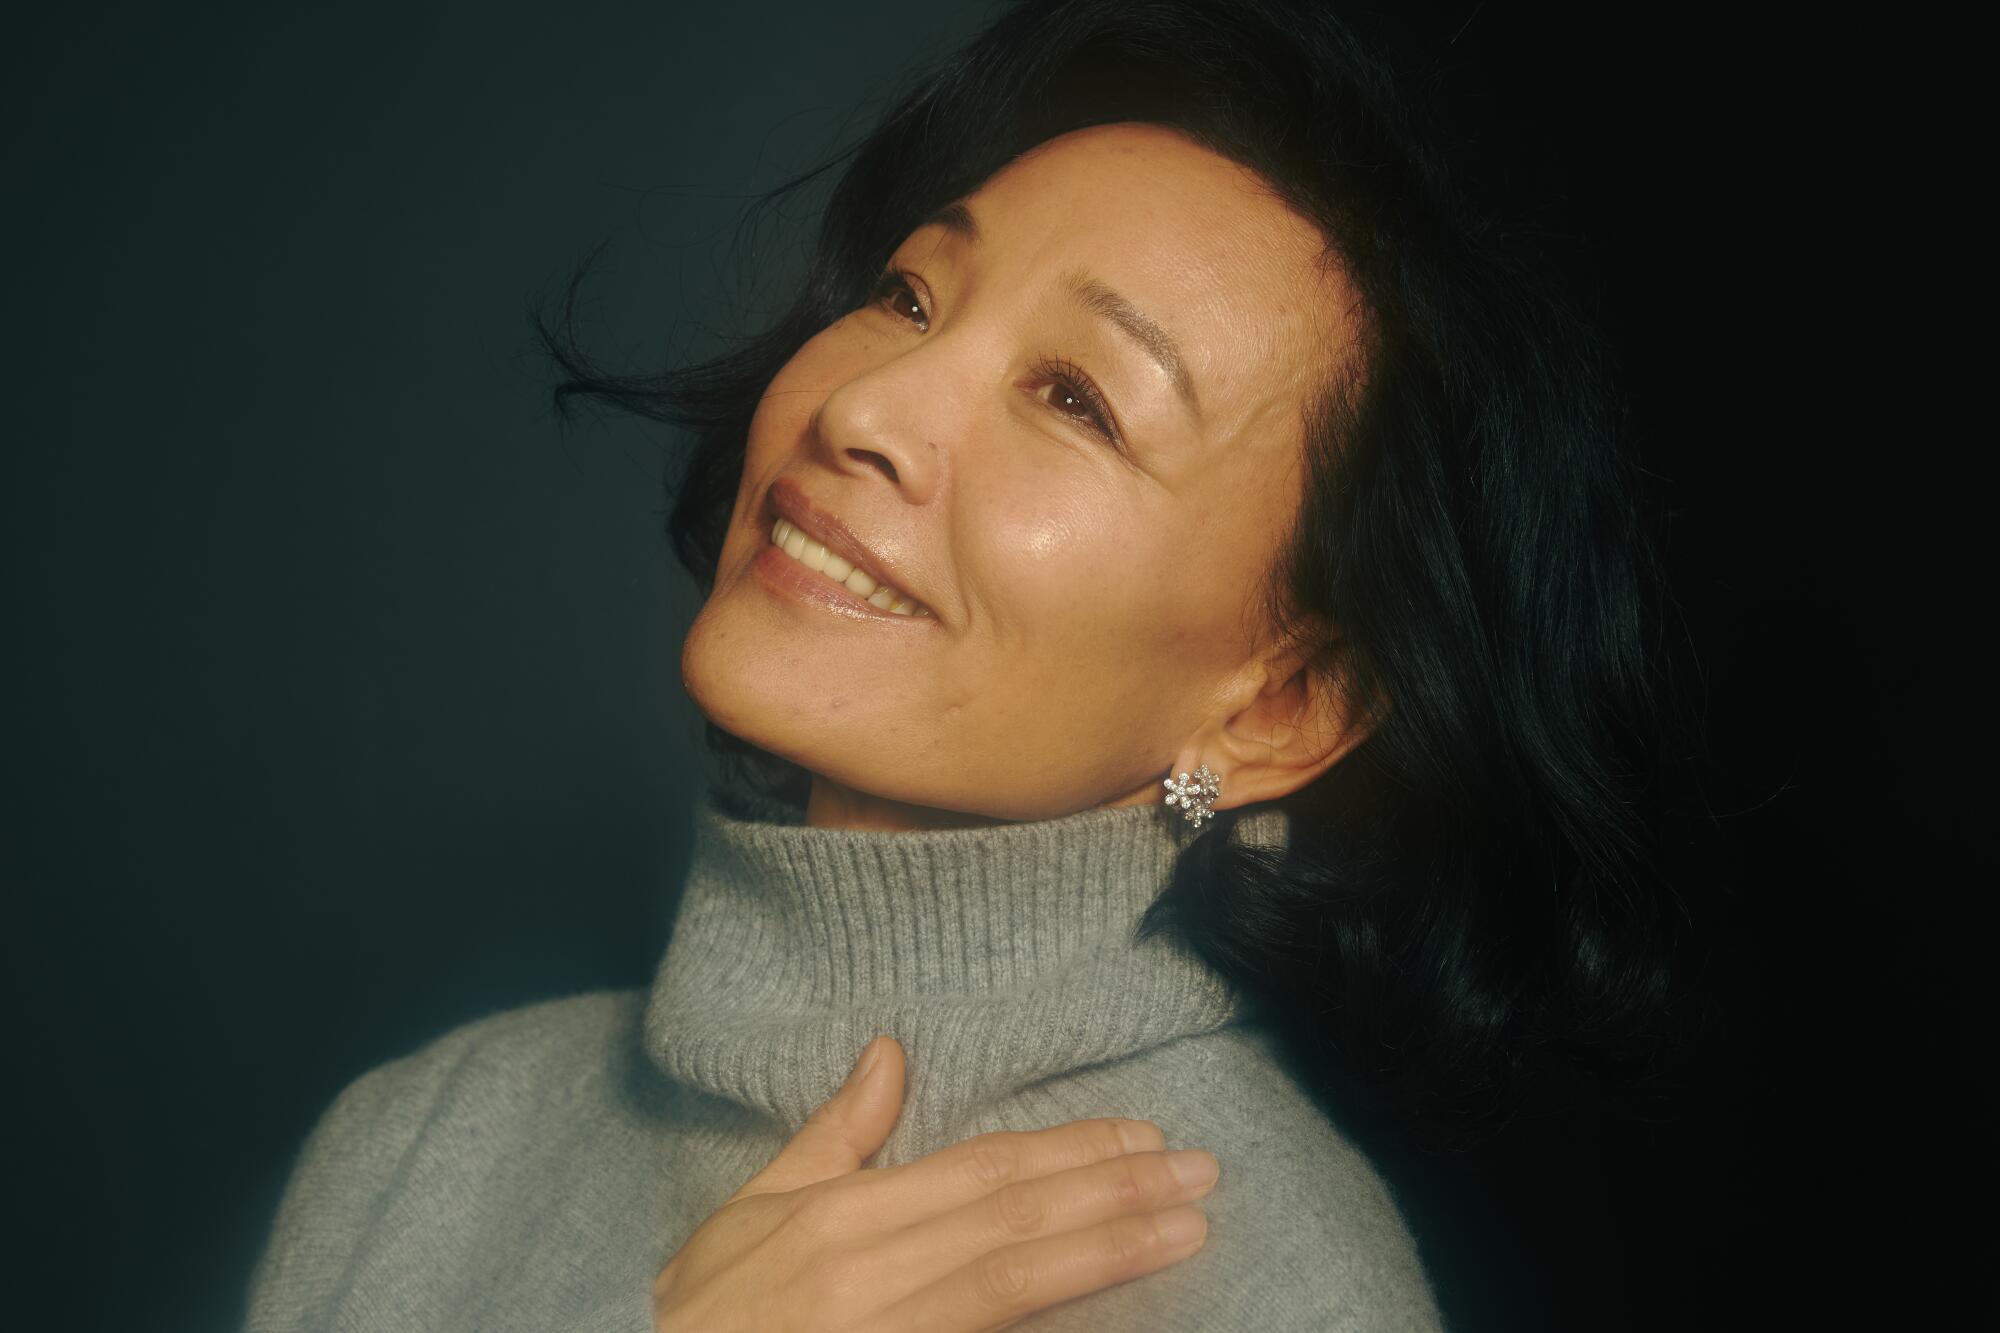 A woman holds her hand to her chest and smiles.